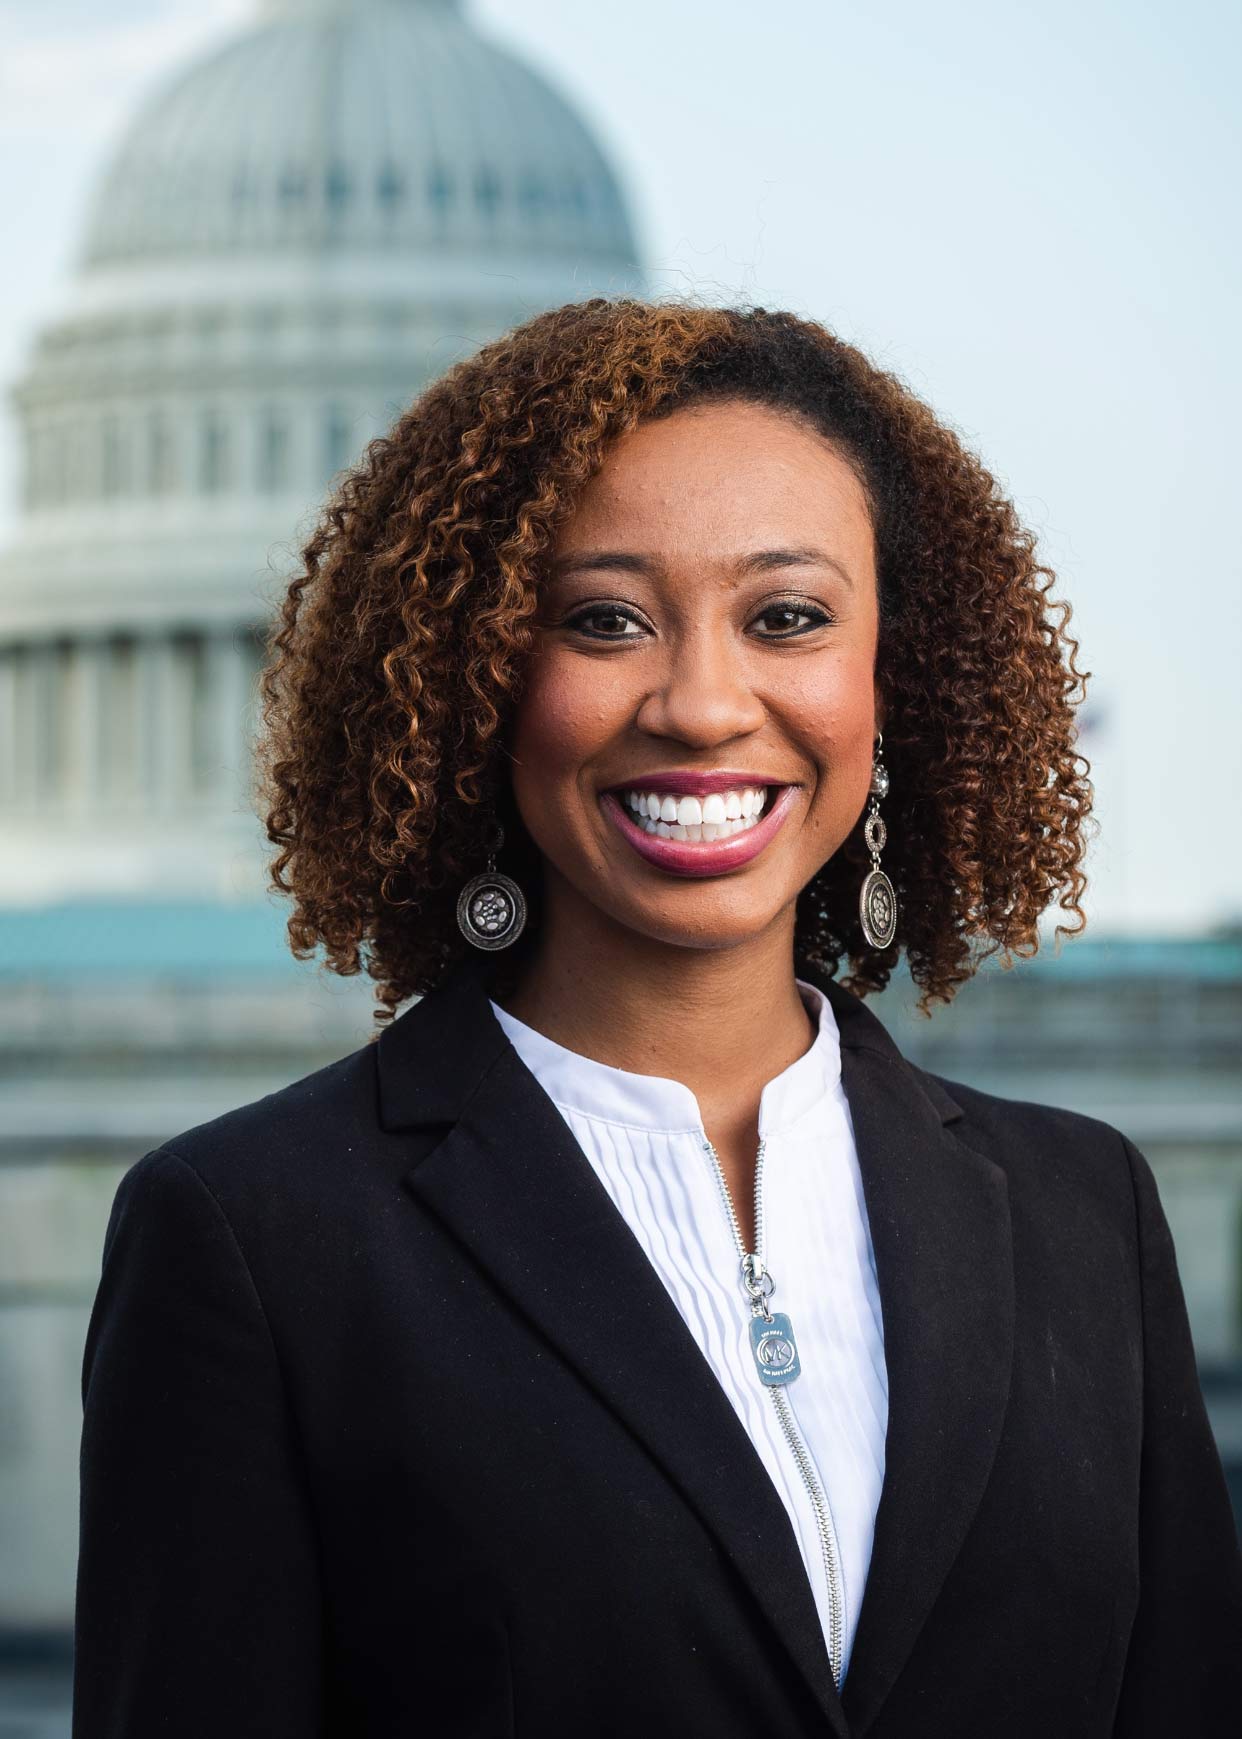 Headshot of a young black woman in business attire.